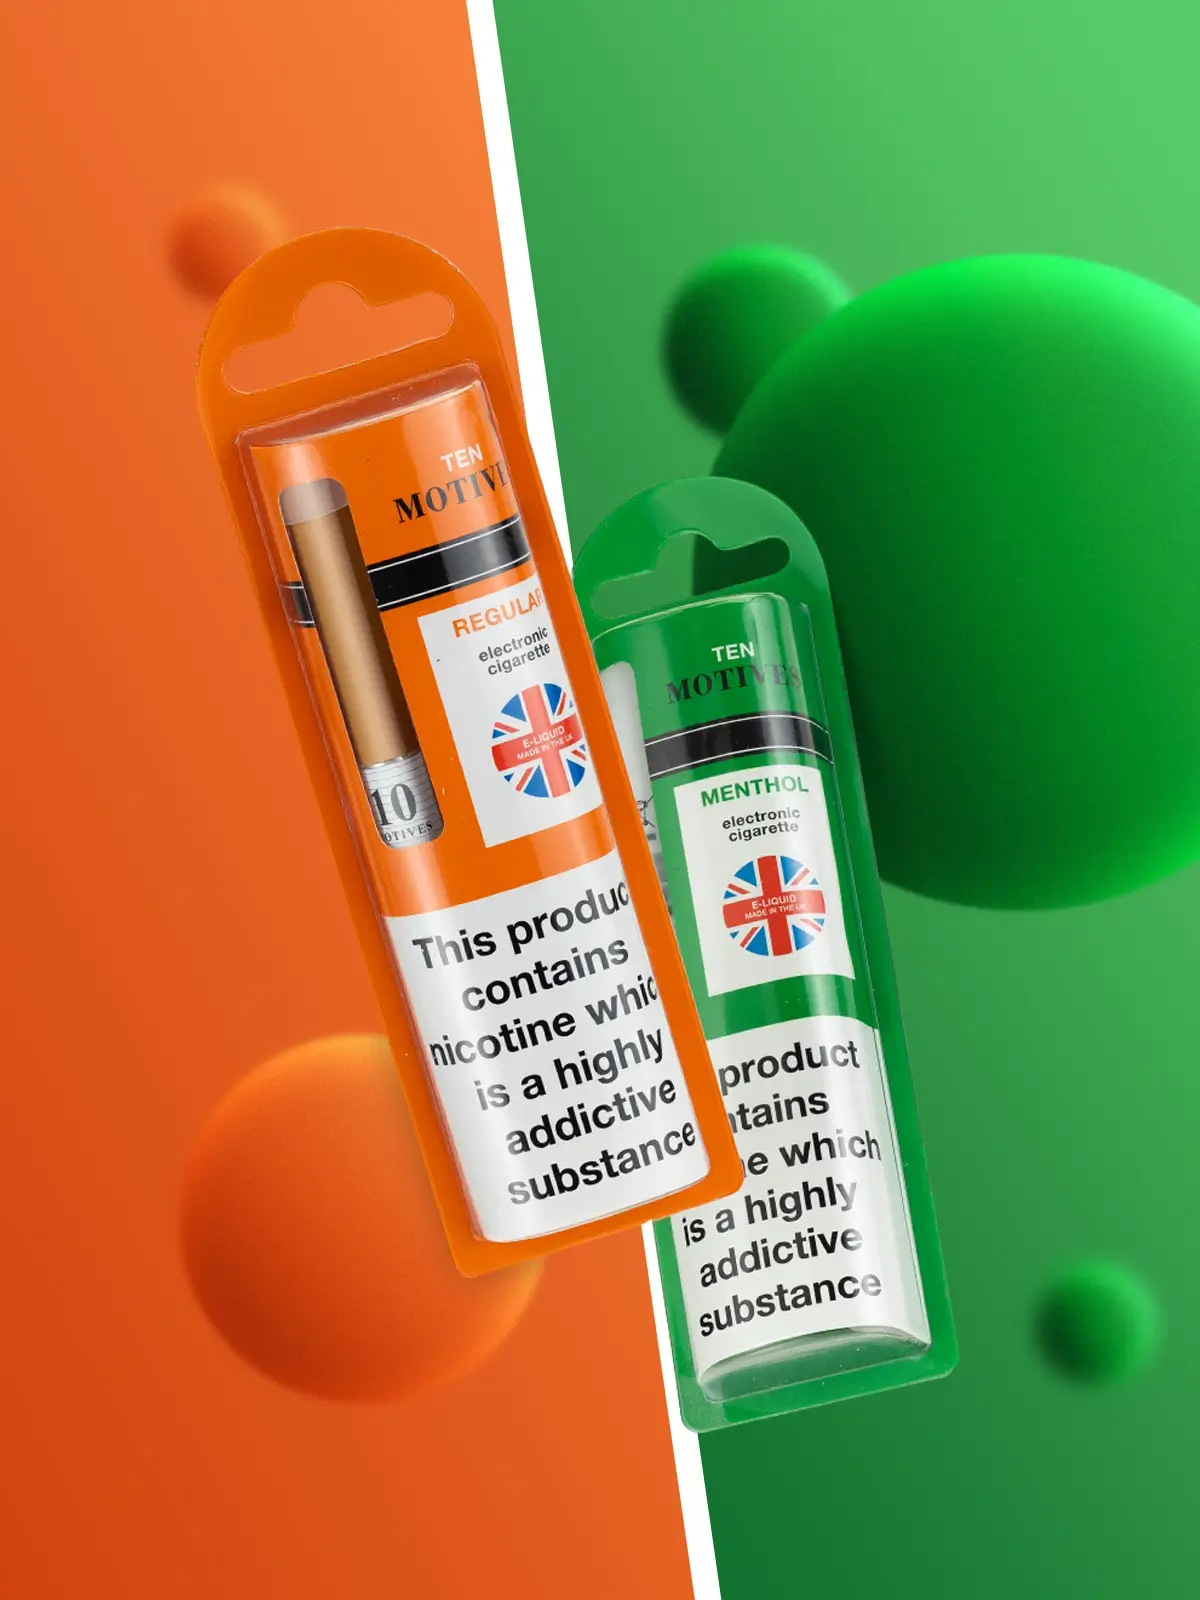 Two packs of Ten Motives disposable vapes in their packaging, floating in front of a half and half orange/green background